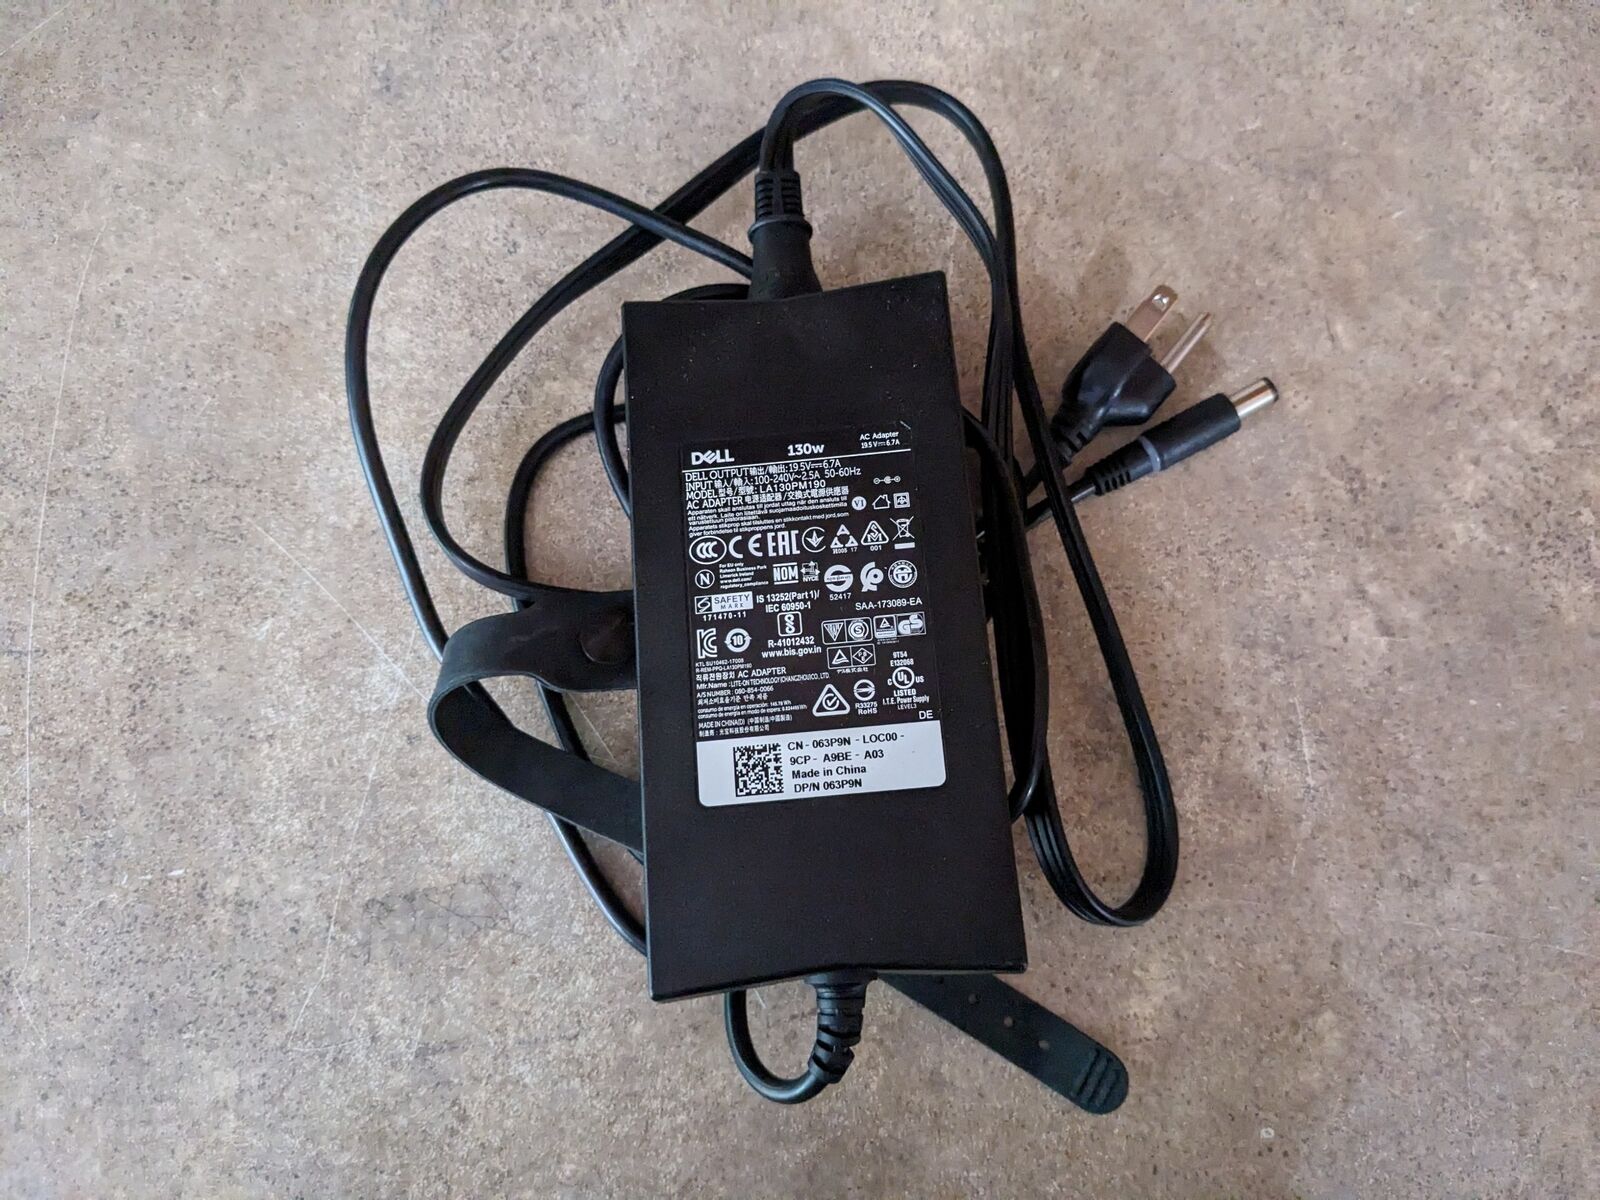 GENUINE DELL OEM 130W 7.4MM AC POWER ADAPTER CHARGER LA130PM190-00 M5-1(7)